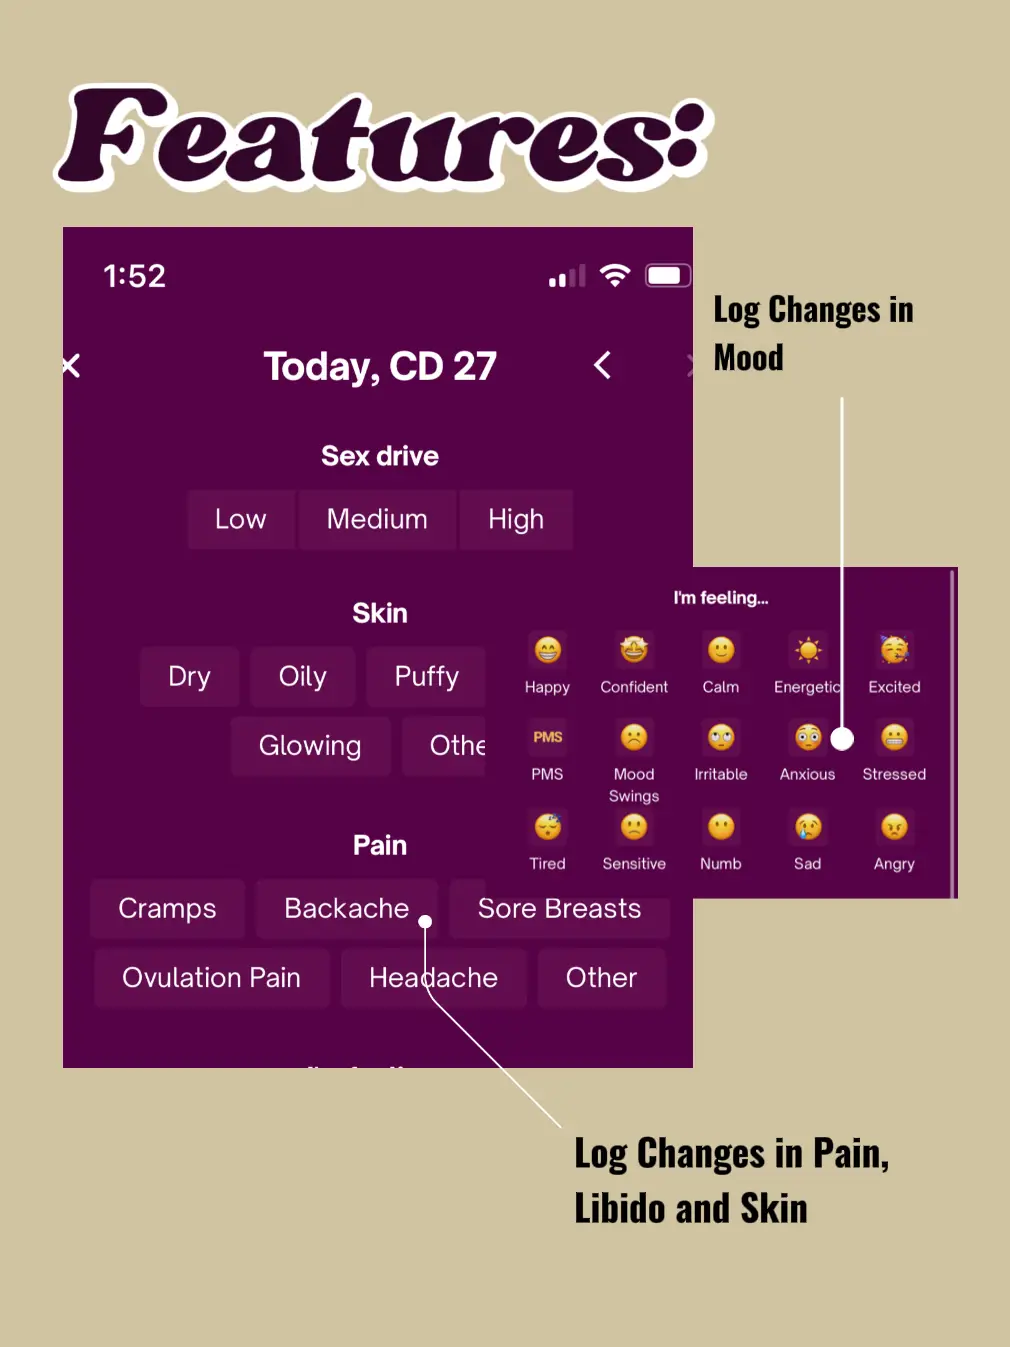  A graph showing changes in mood and emotions over the course of a day.